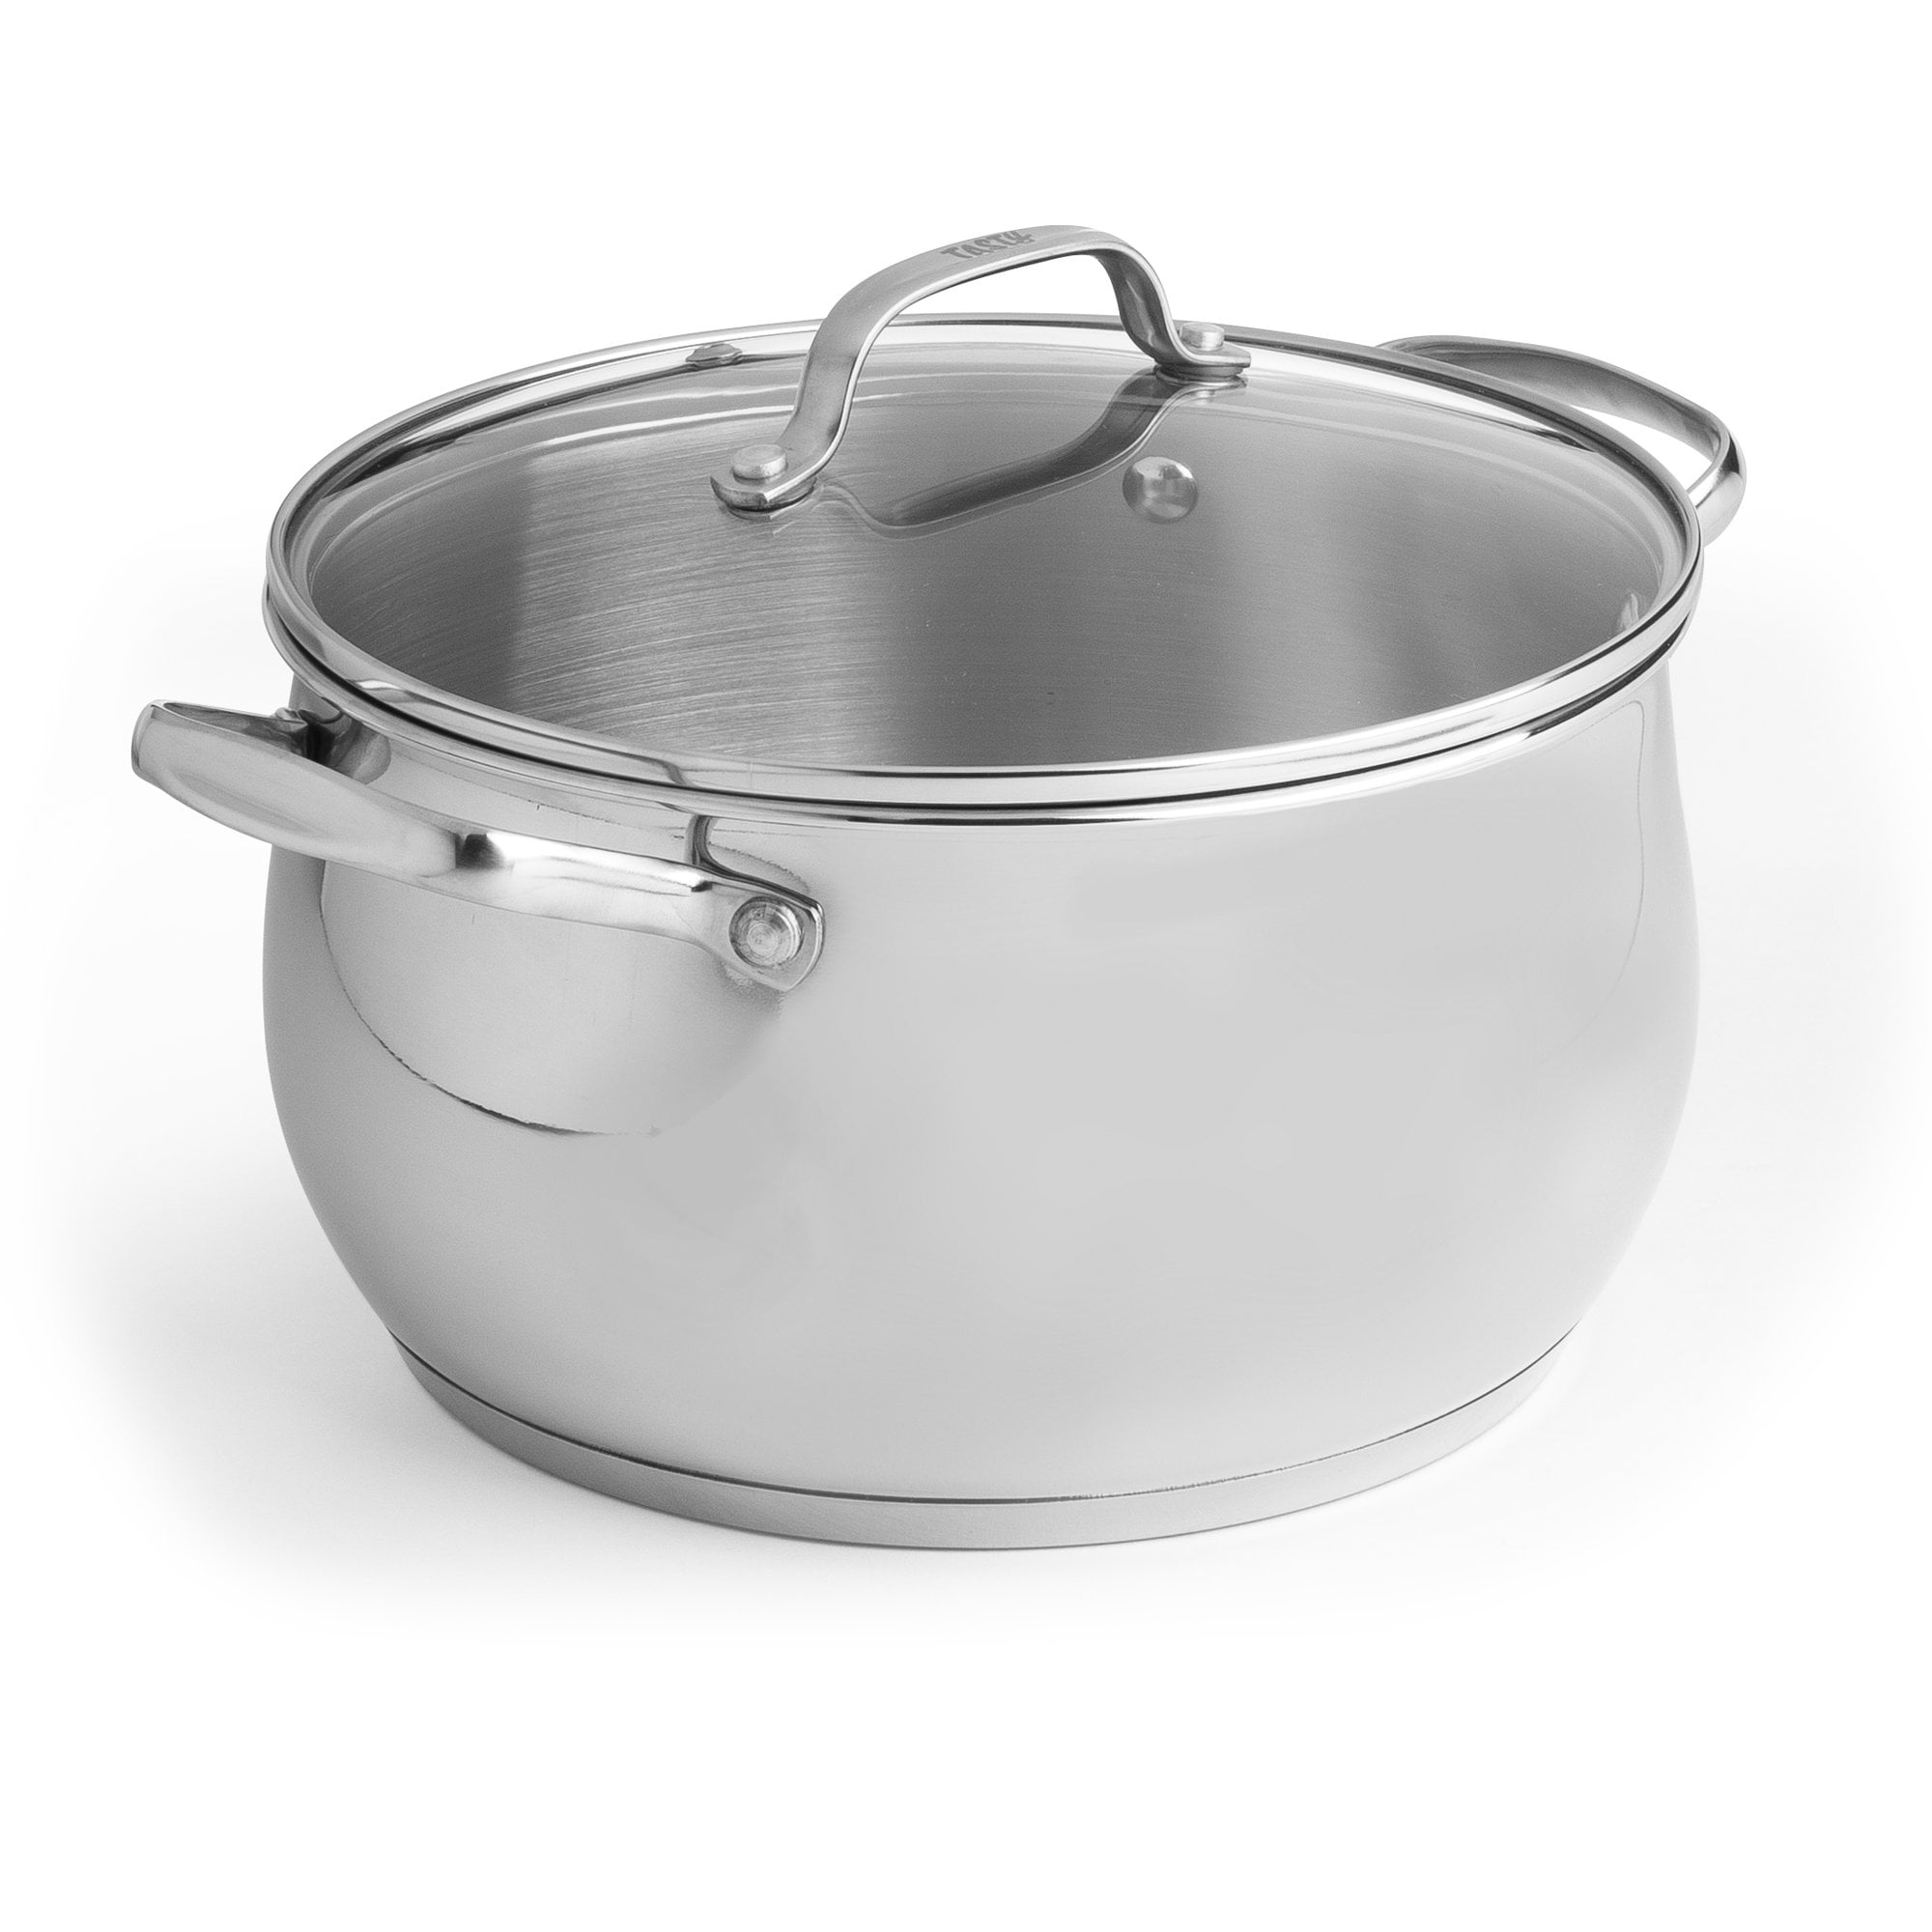 Stainless Steel Dutch Oven and Glass Lid, 5 Quart Pots for Cooking